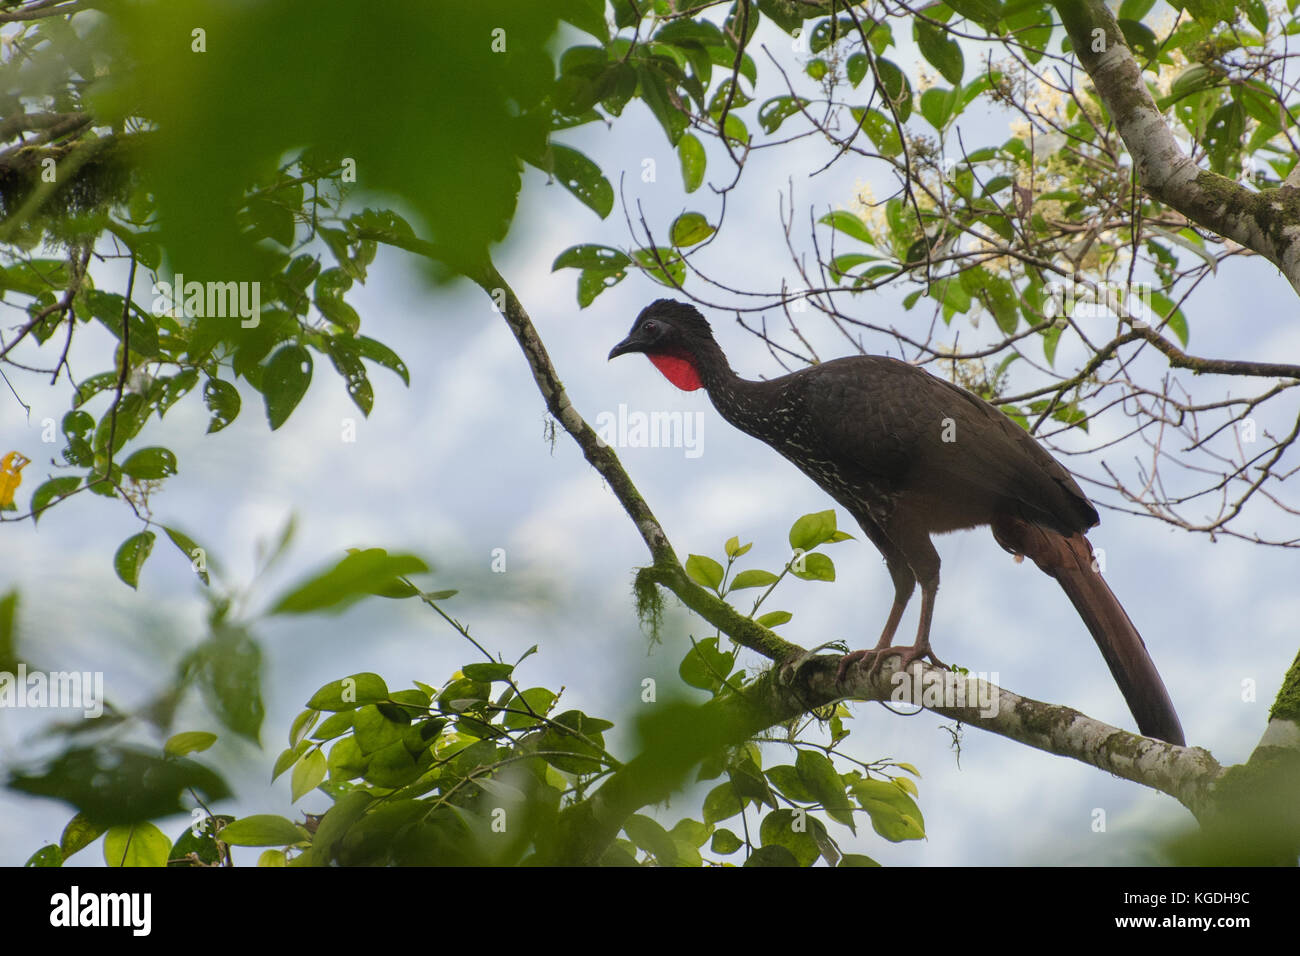 A crested guan from the el oro province of Ecuador. These large birds resemble turkeys. Stock Photo